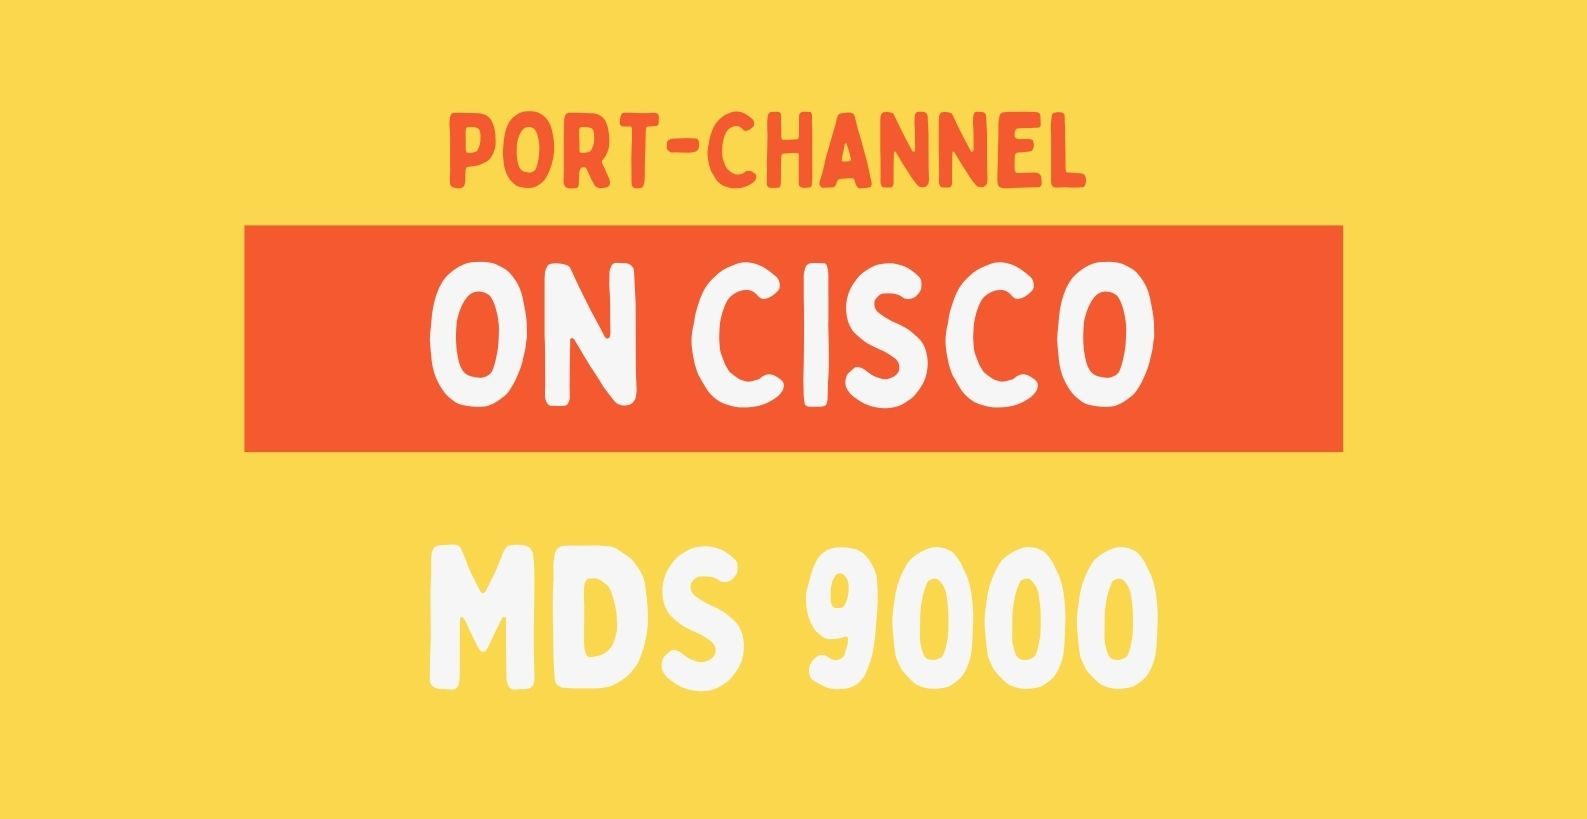 Port-Channel on  Cisco MDS 9000